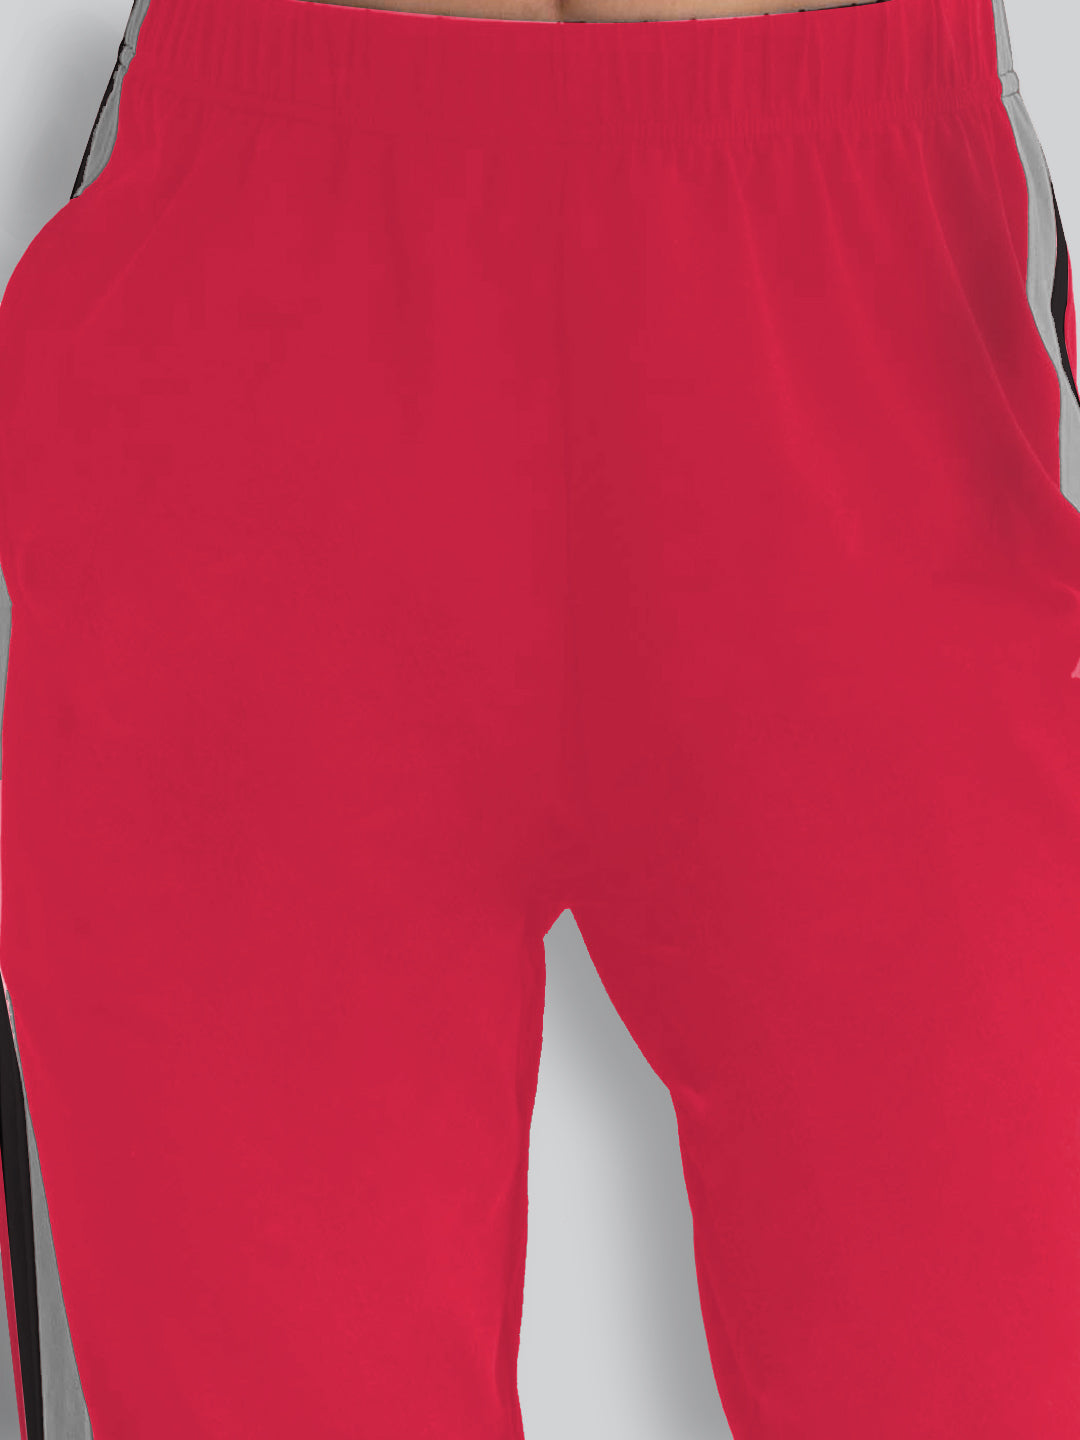 Pink Track Pant #303